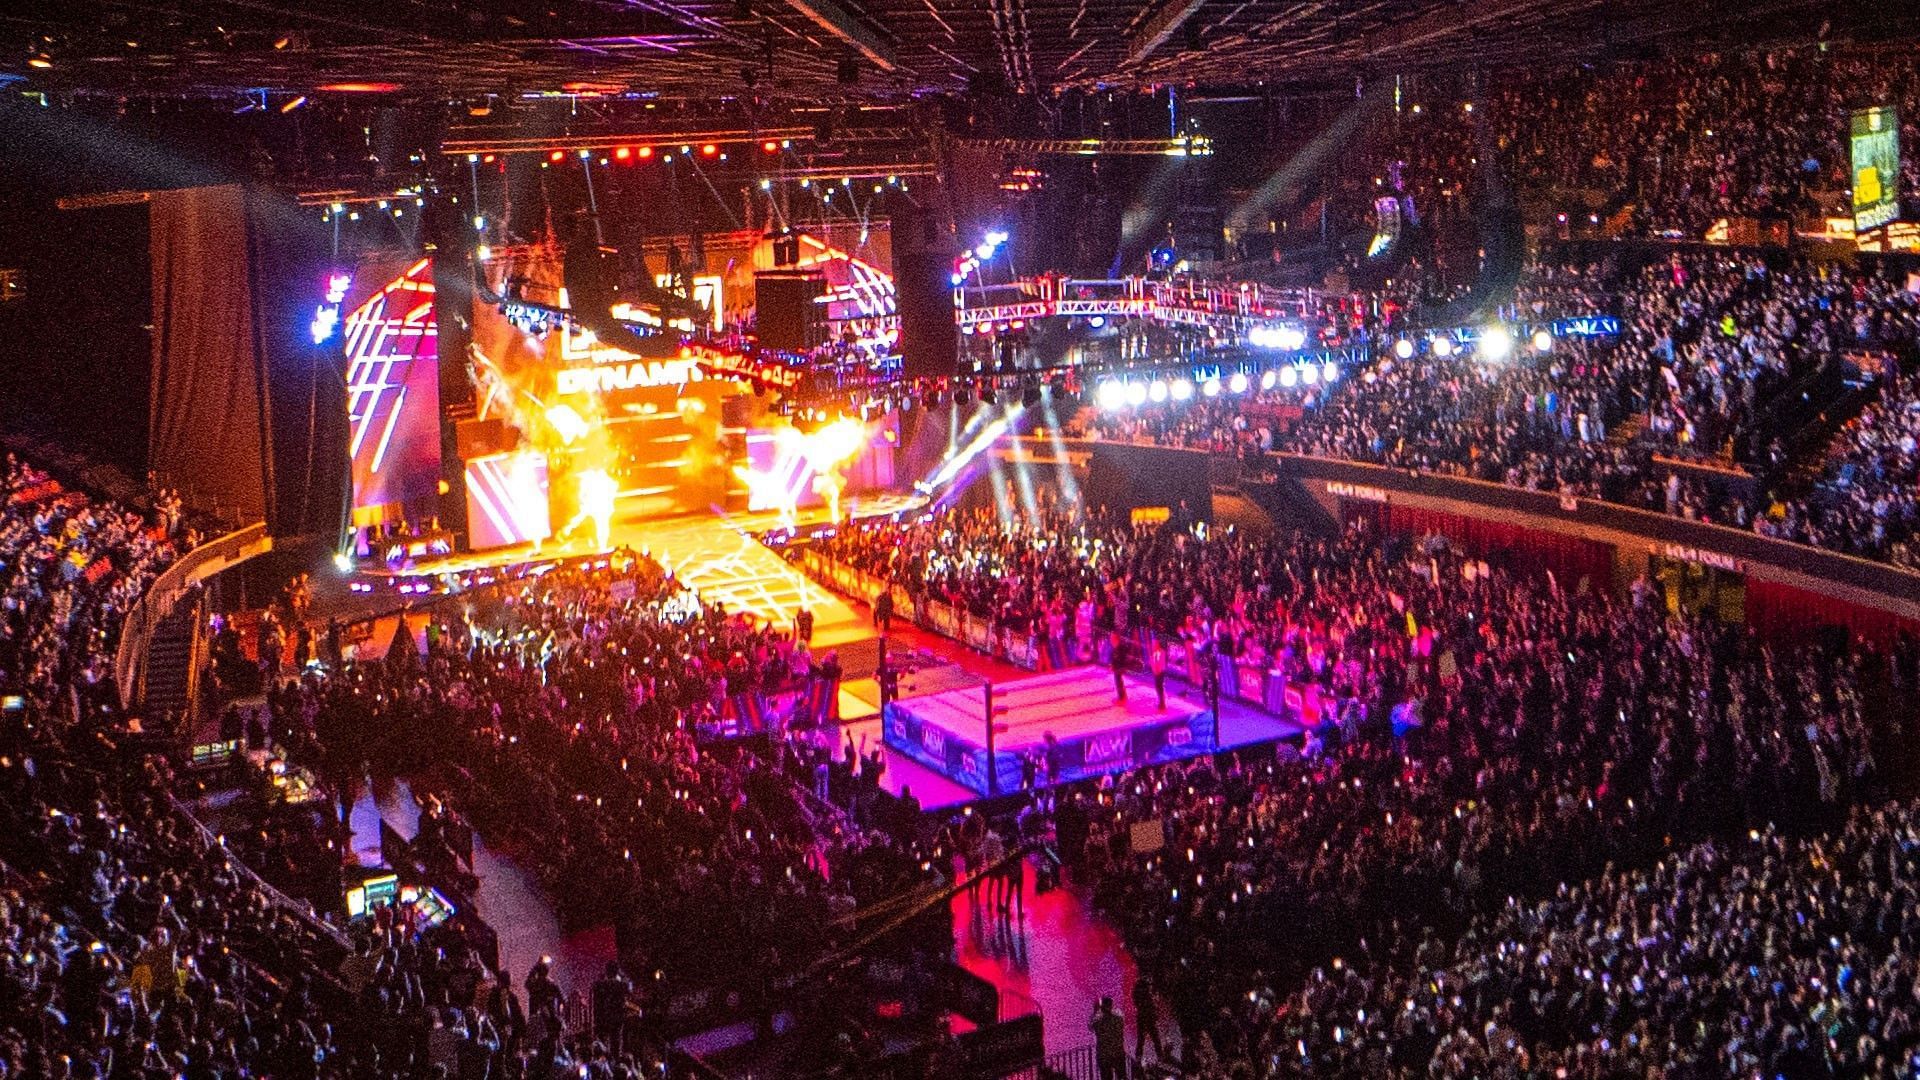 AEW fans pack an arena for a live Dynamite TV episode